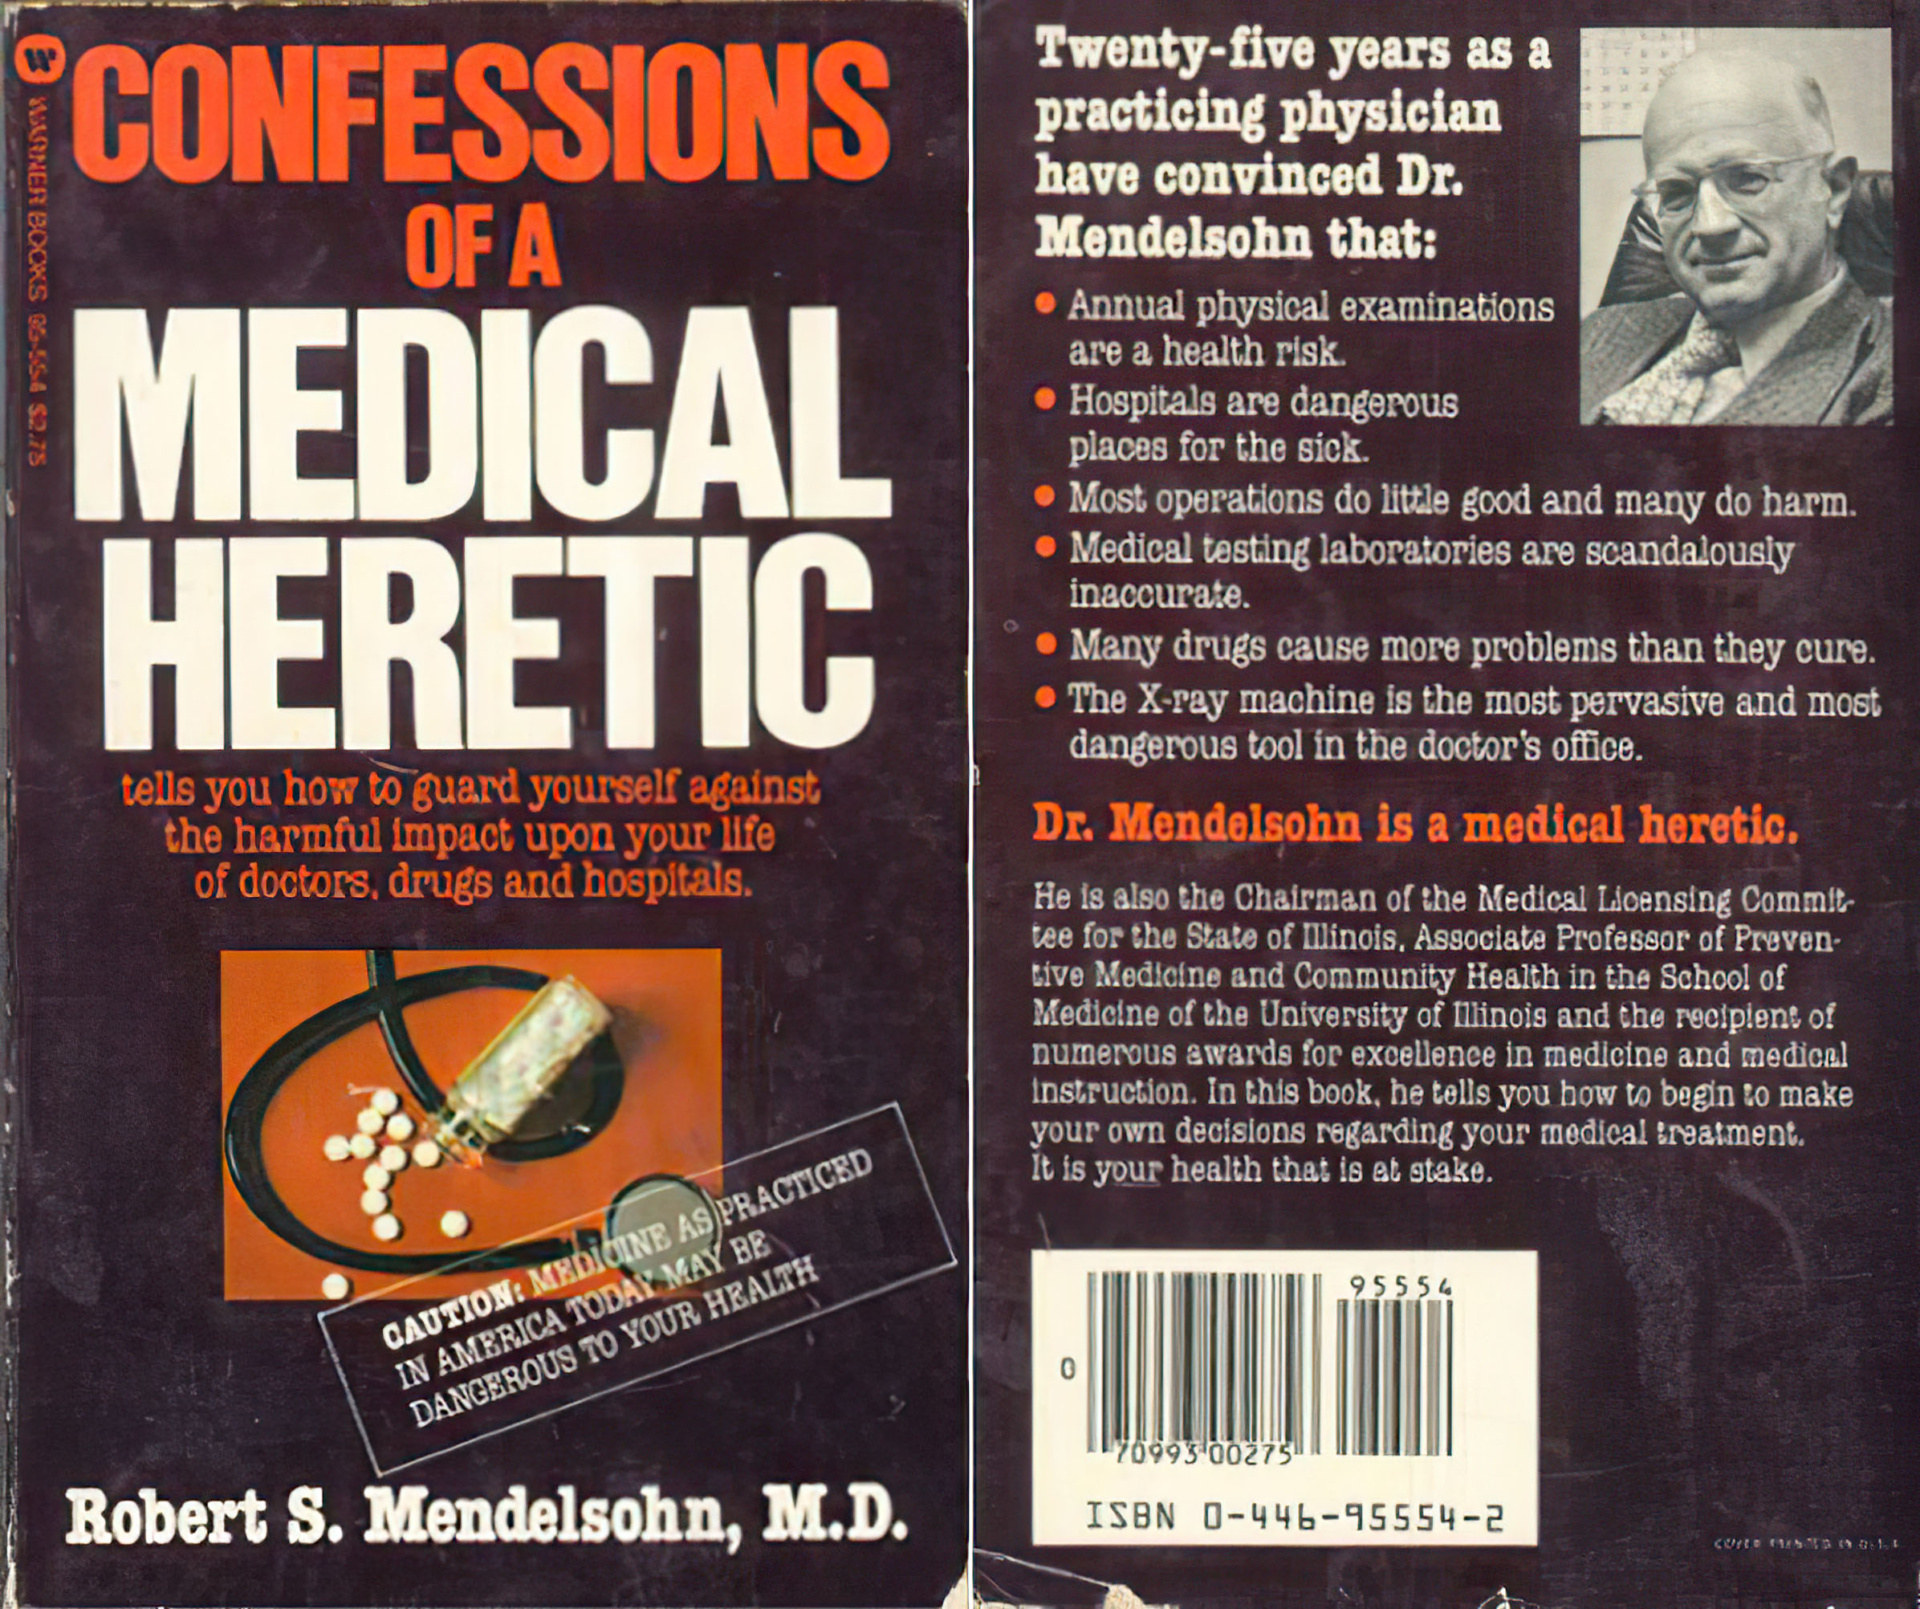 Confessions of a Medical Heretic by Robert S. Mendelsohn